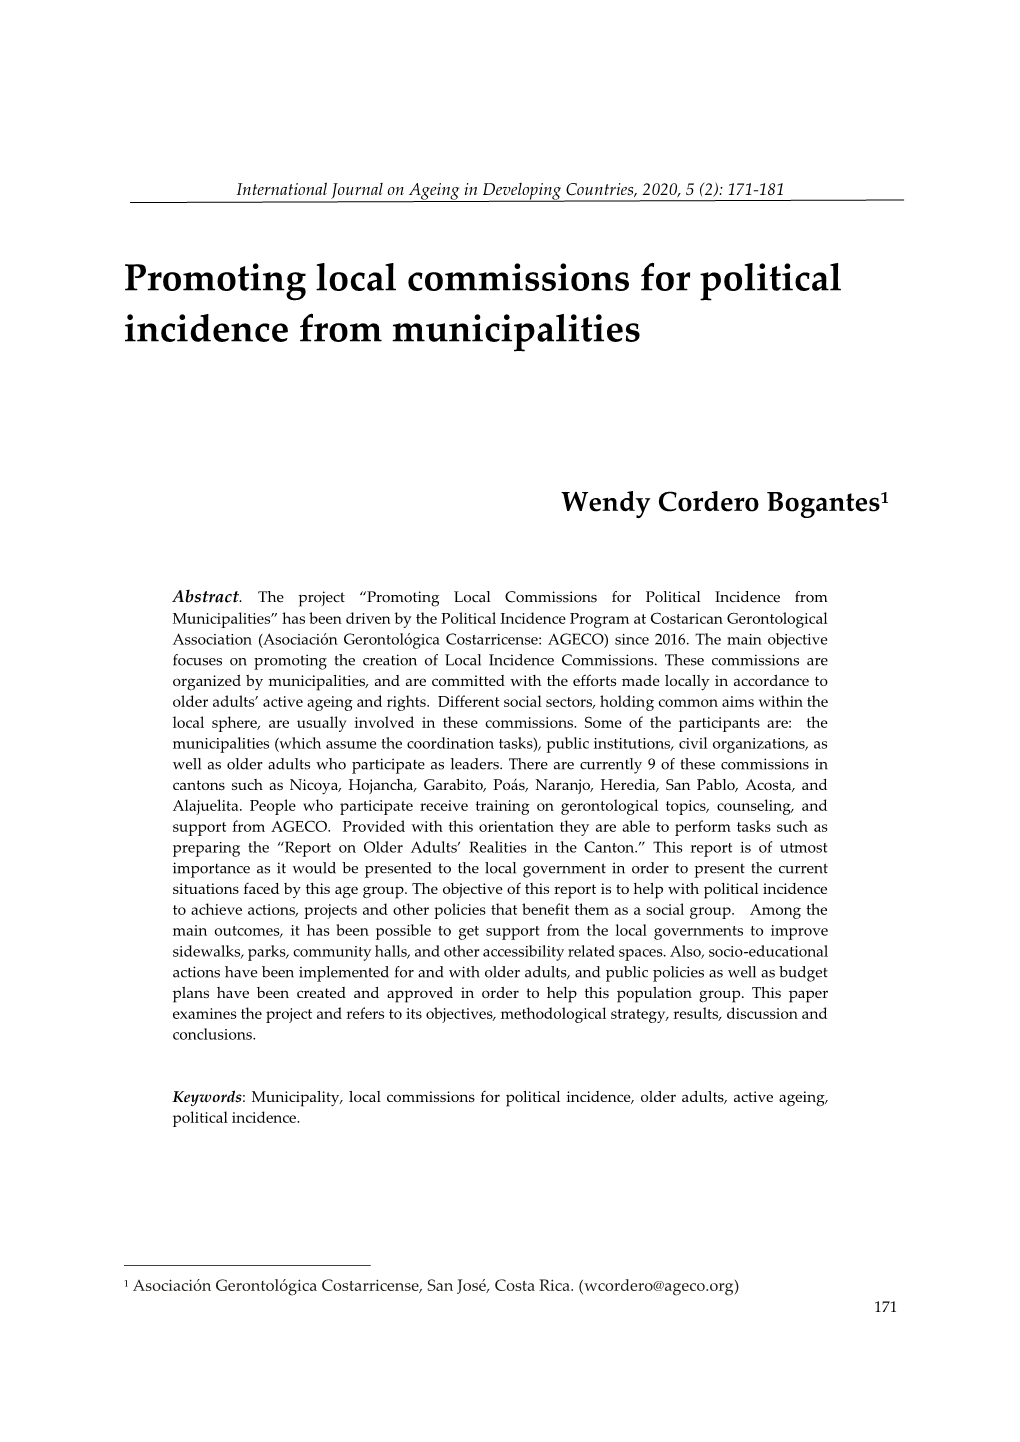 Promoting Local Commissions for Political Incidence from Municipalities